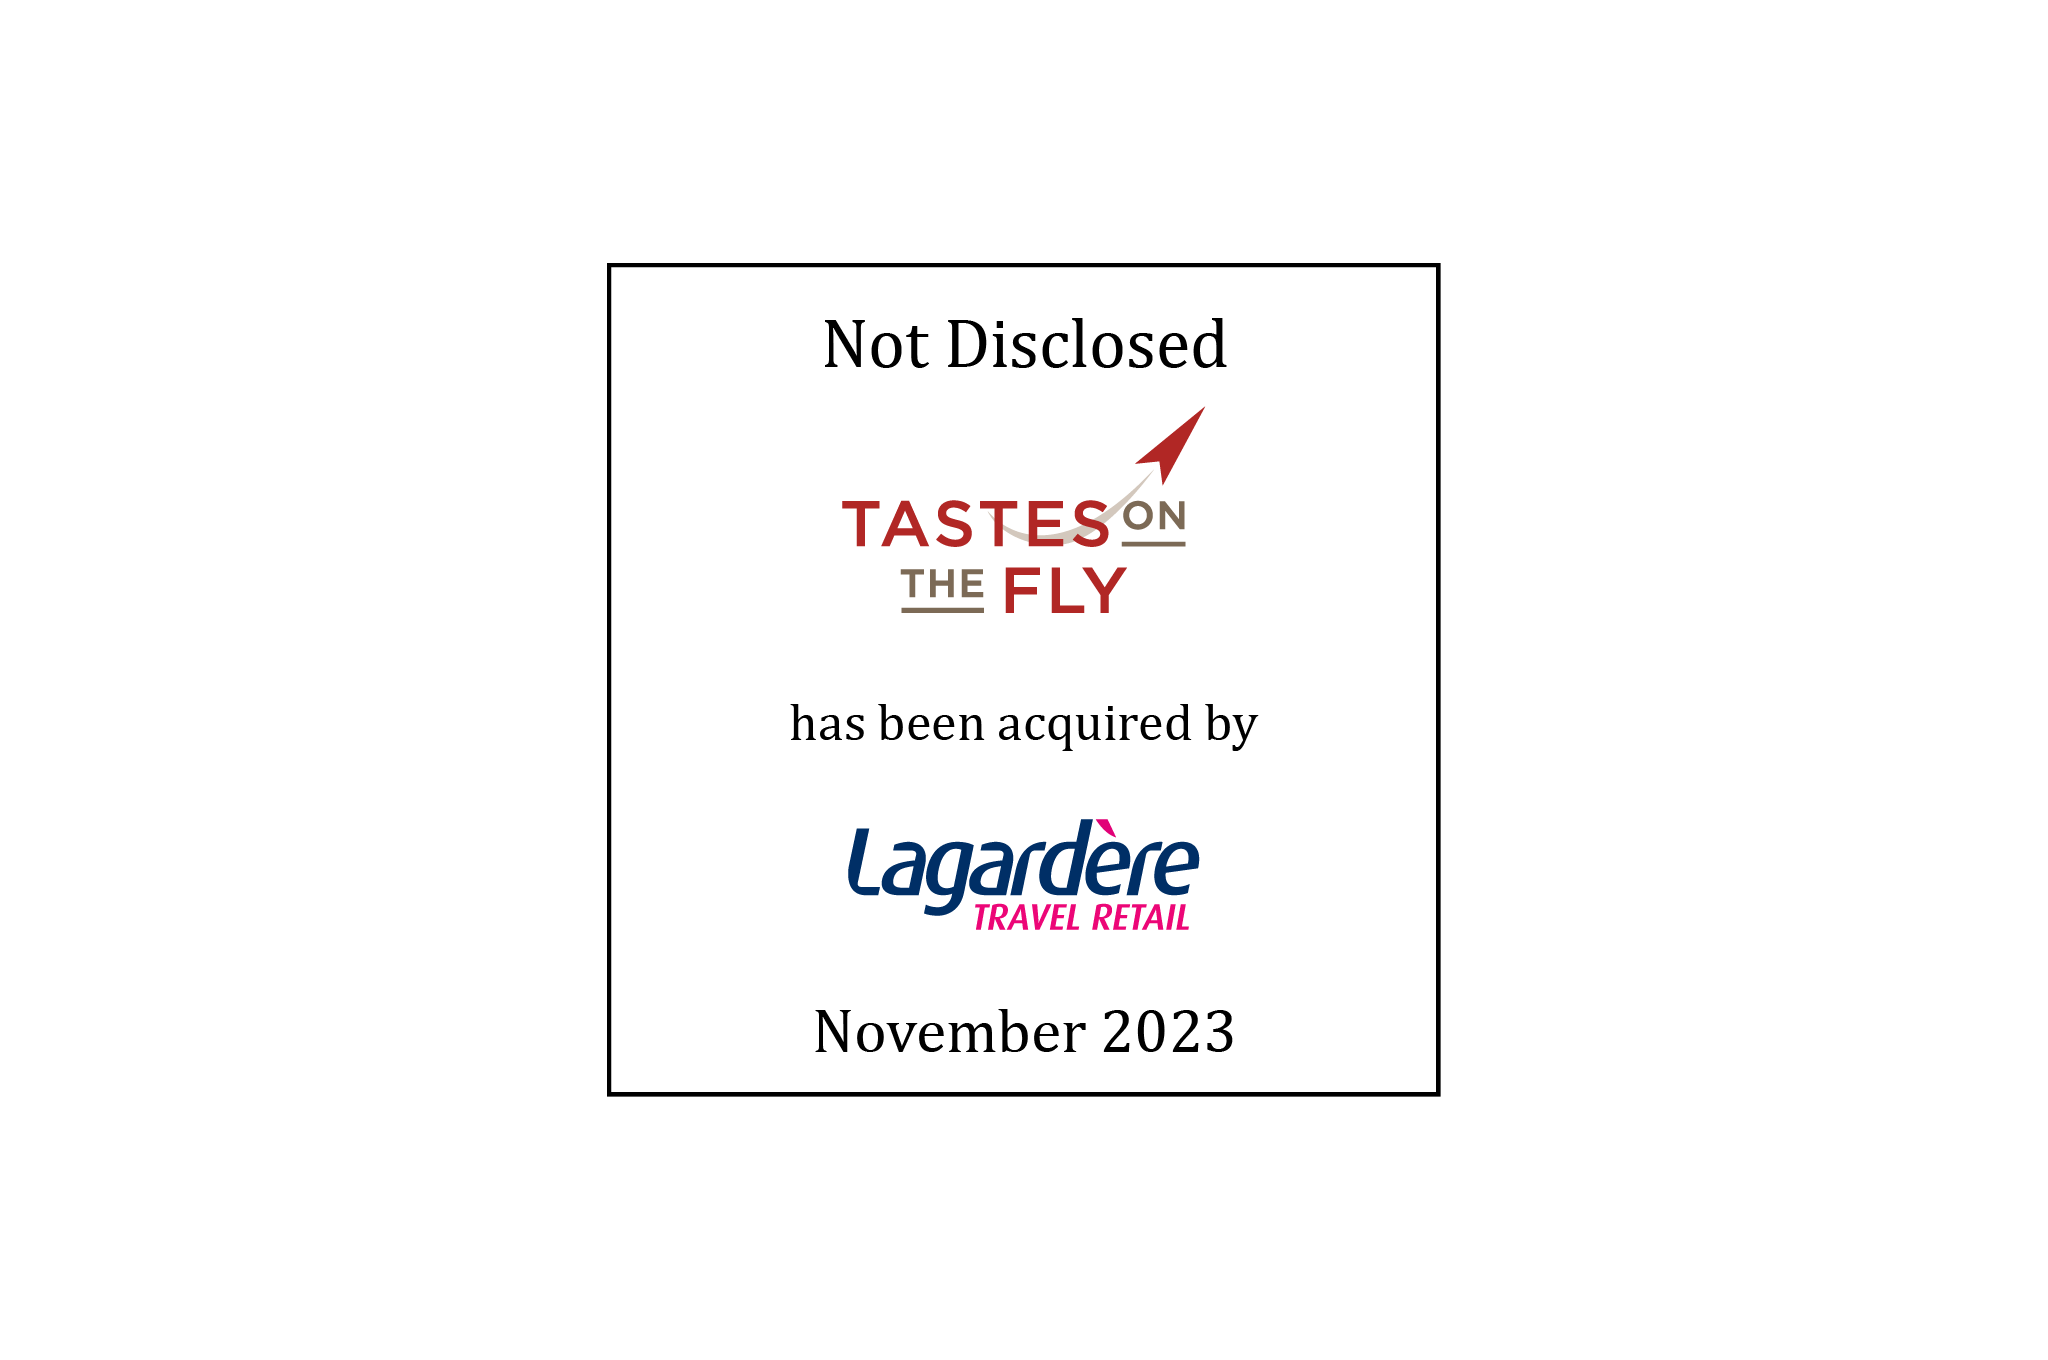 Not Disclosed | Tastes on the Fly (logo) has been acquired by Lagardere Travel Retail (logo) | November 2023